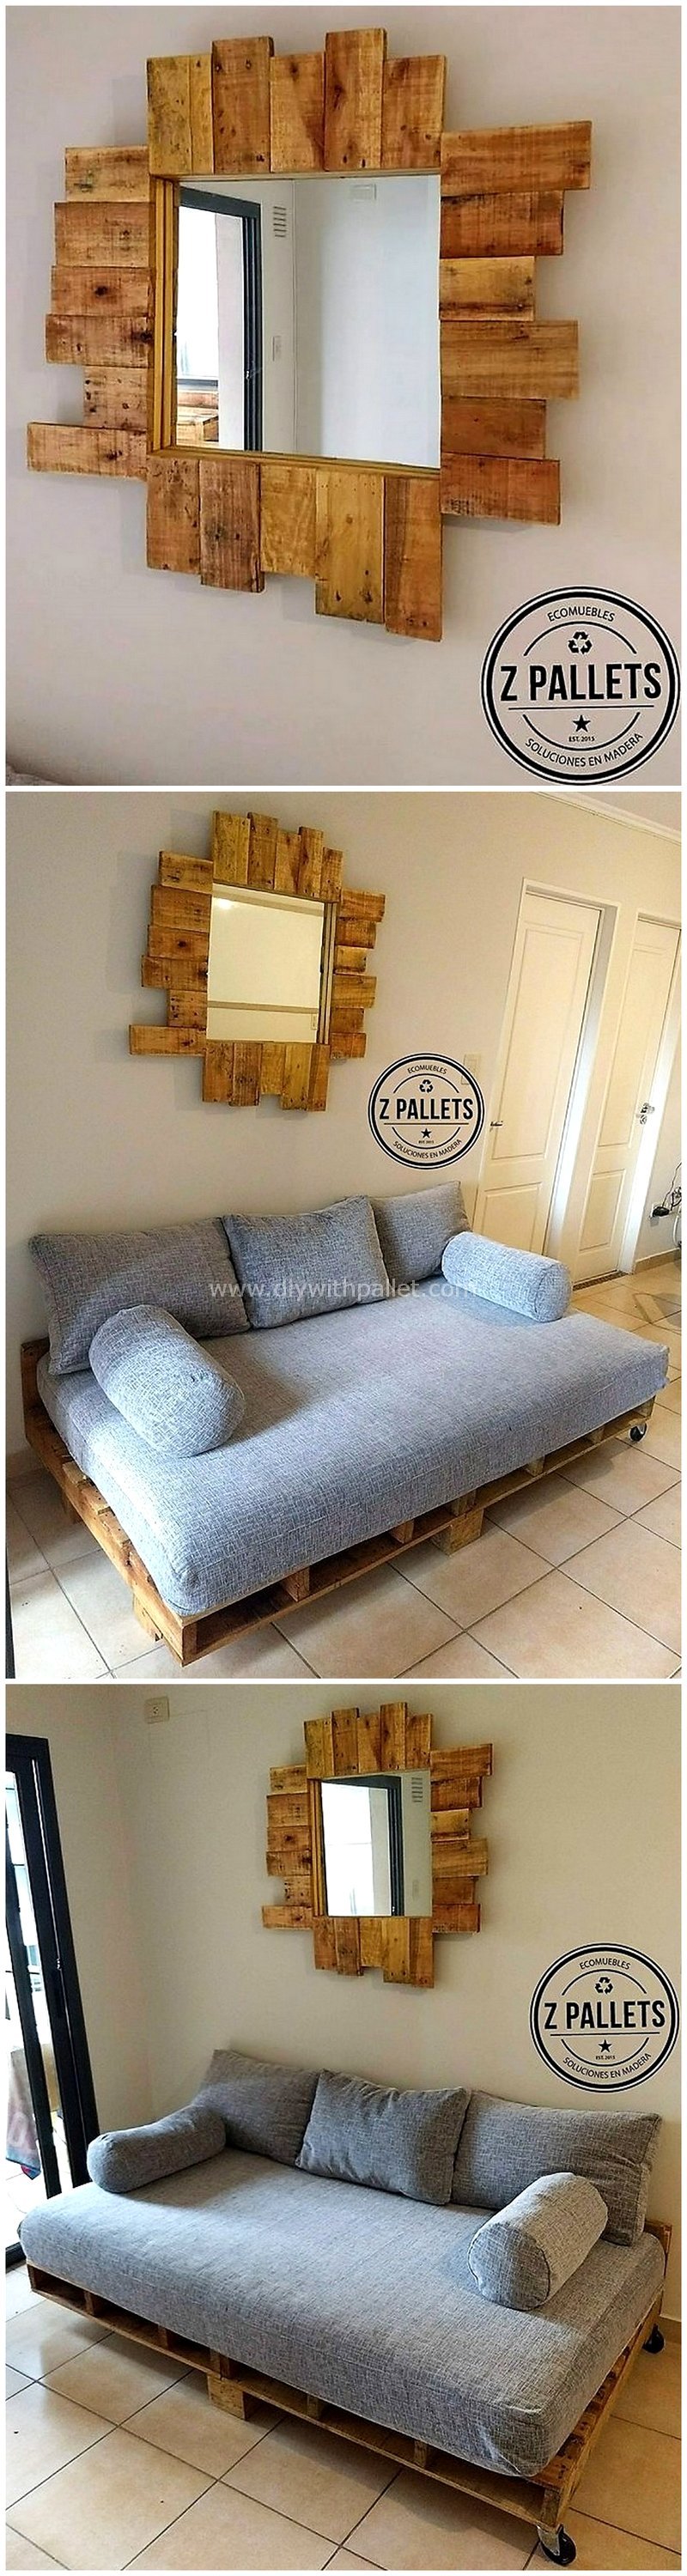 wood pallet couch and wall mirror art